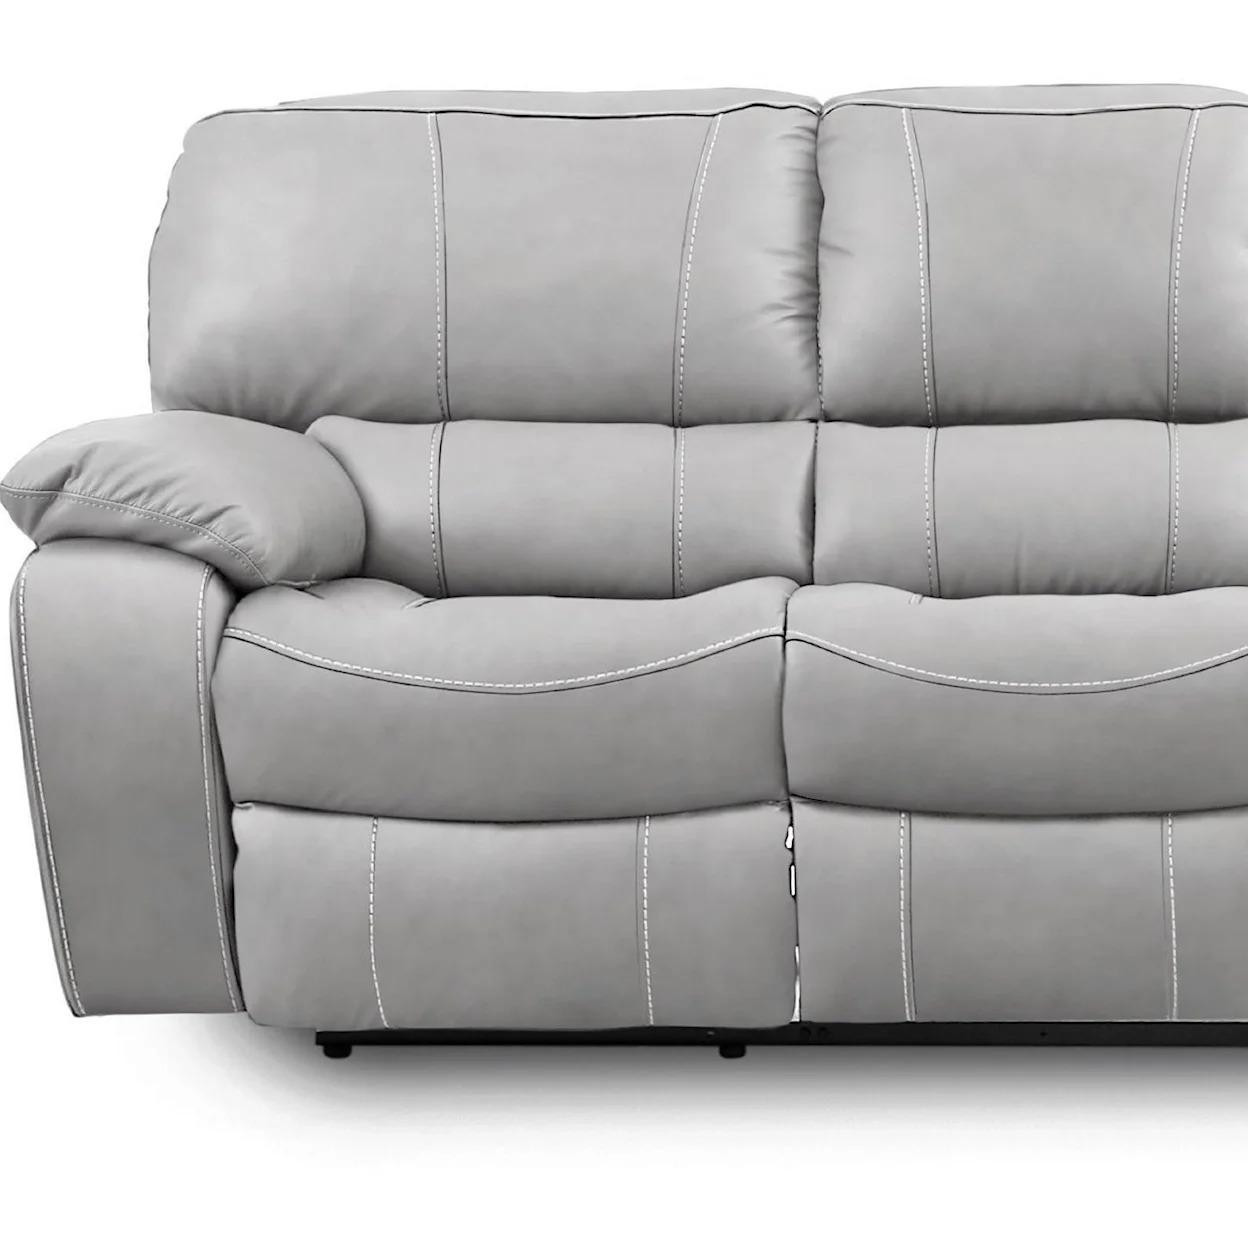 <Diego Manual Dual Reclining Leather / Leather Mate Love Seat with Pillow Arms - Gray